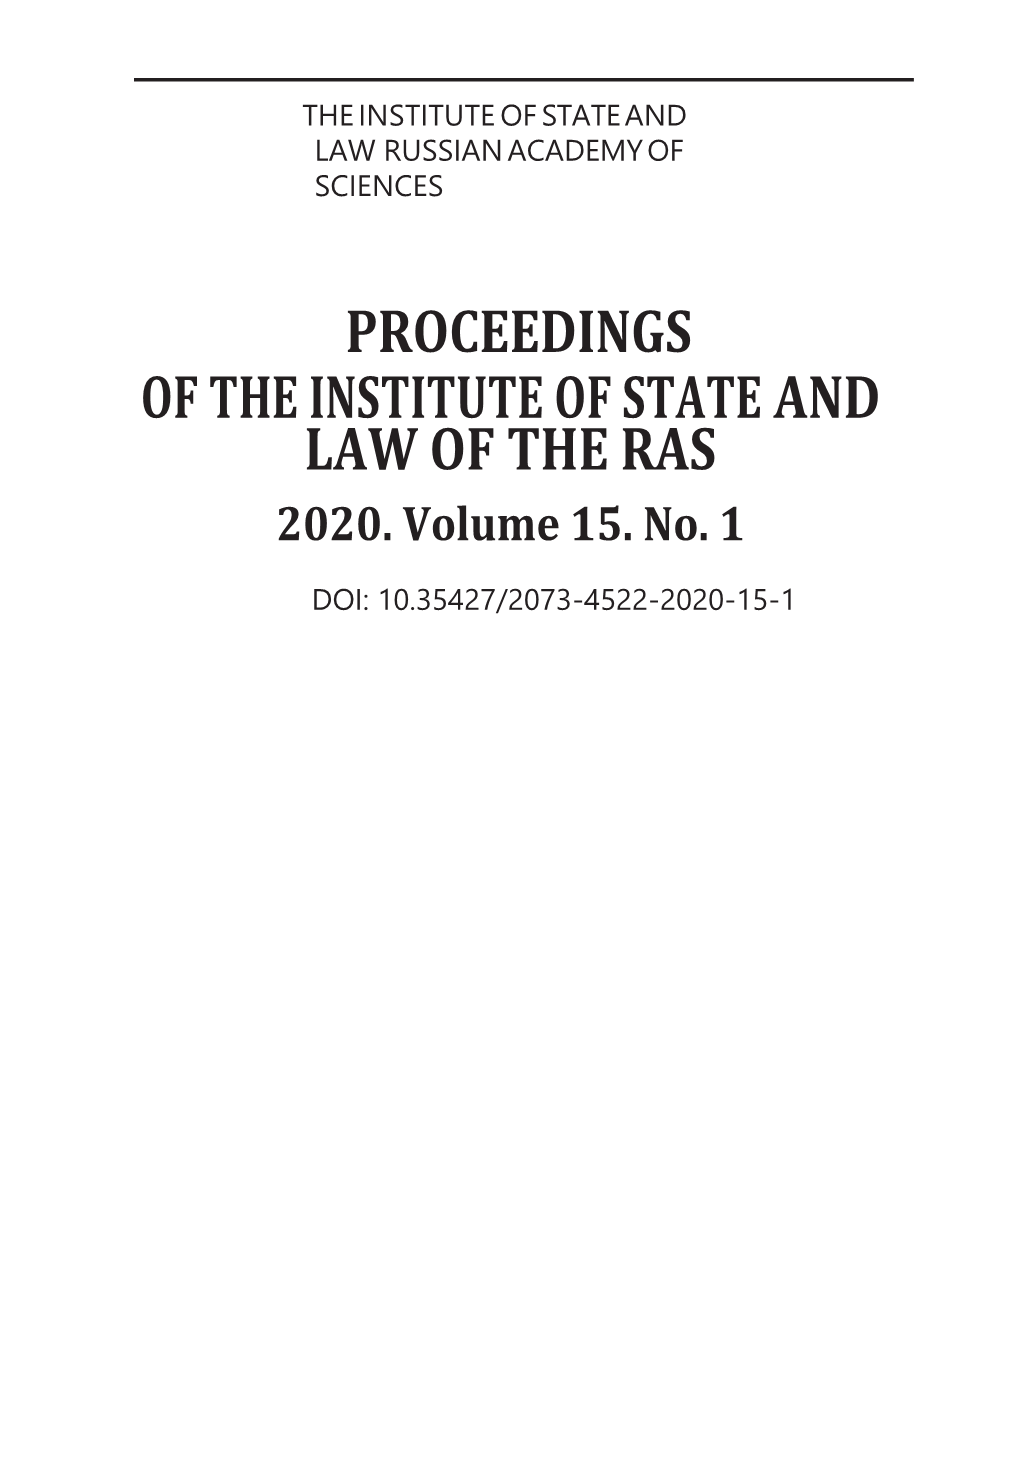 Proceedings of the Institute of State and Law of the Ras 2020